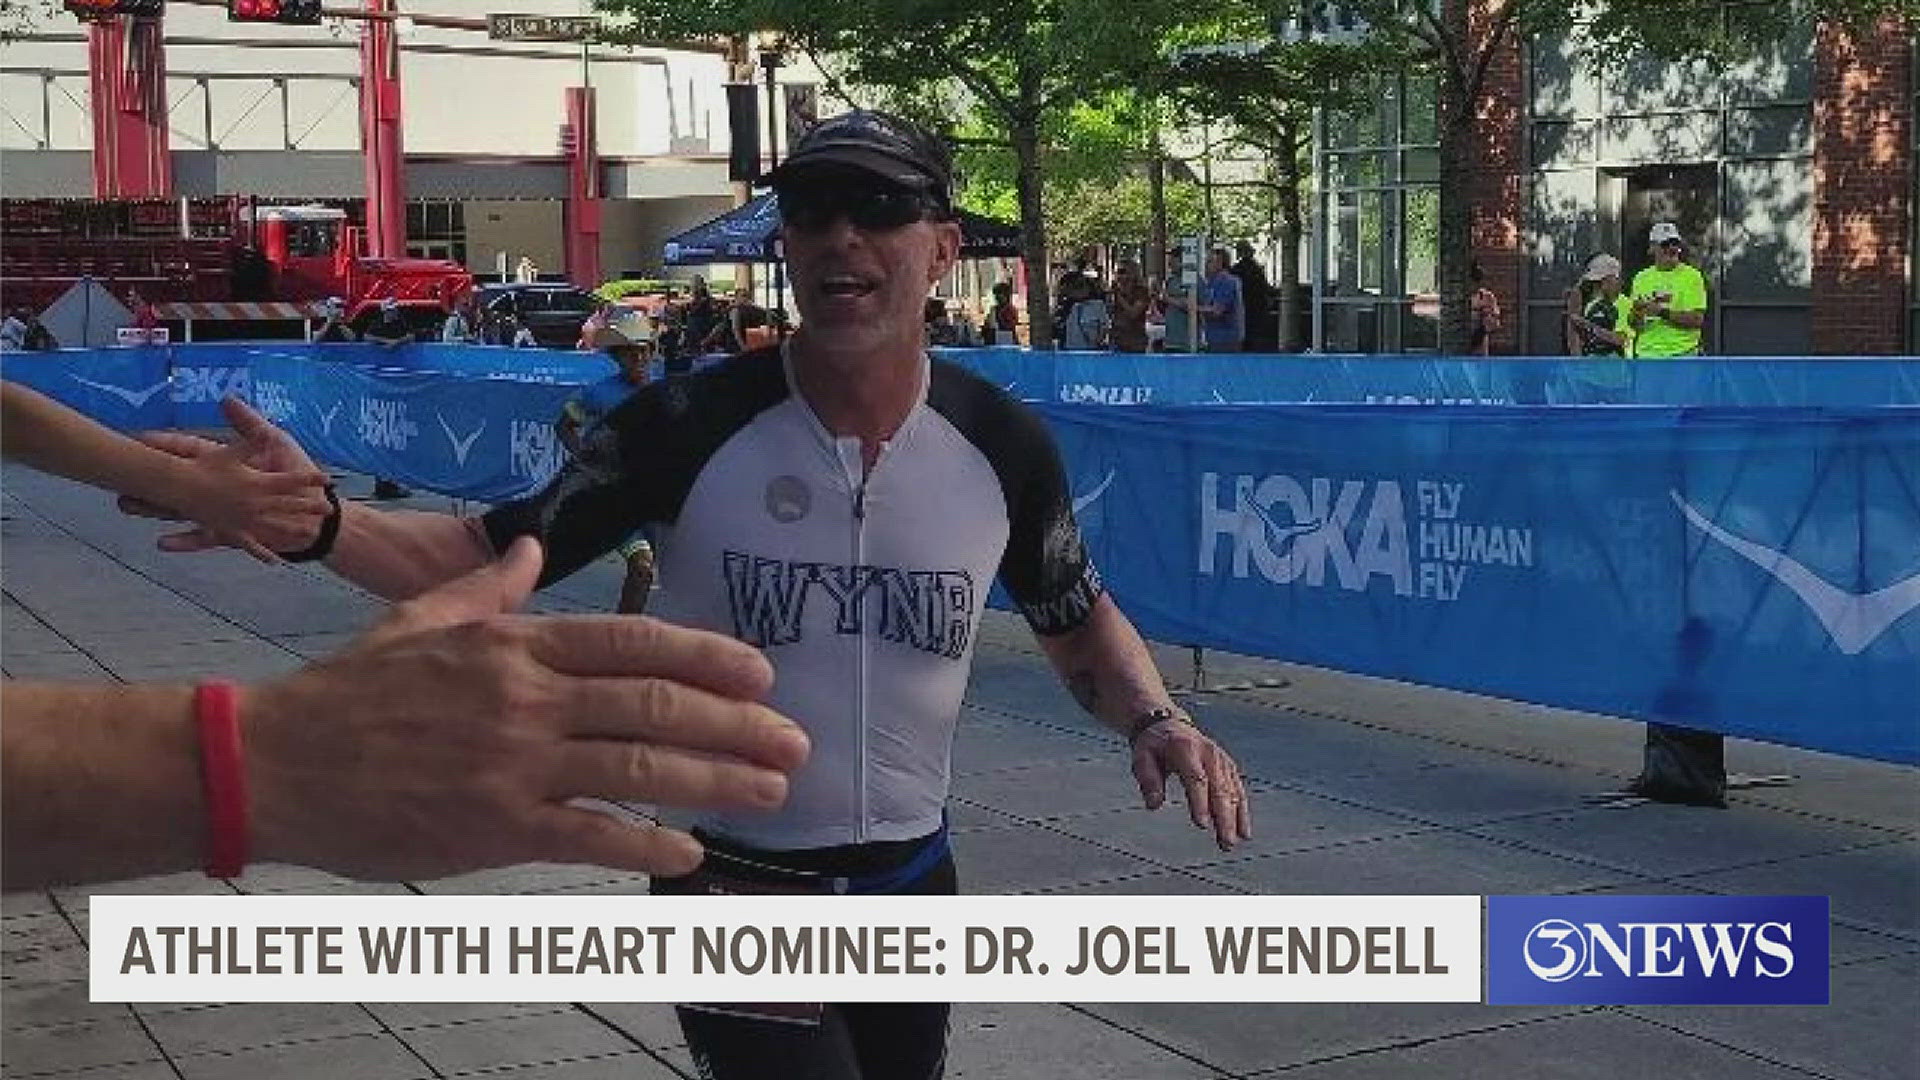 Dr. Joel Wendell is a VA doctor who is also a triathlete and competes across the world.